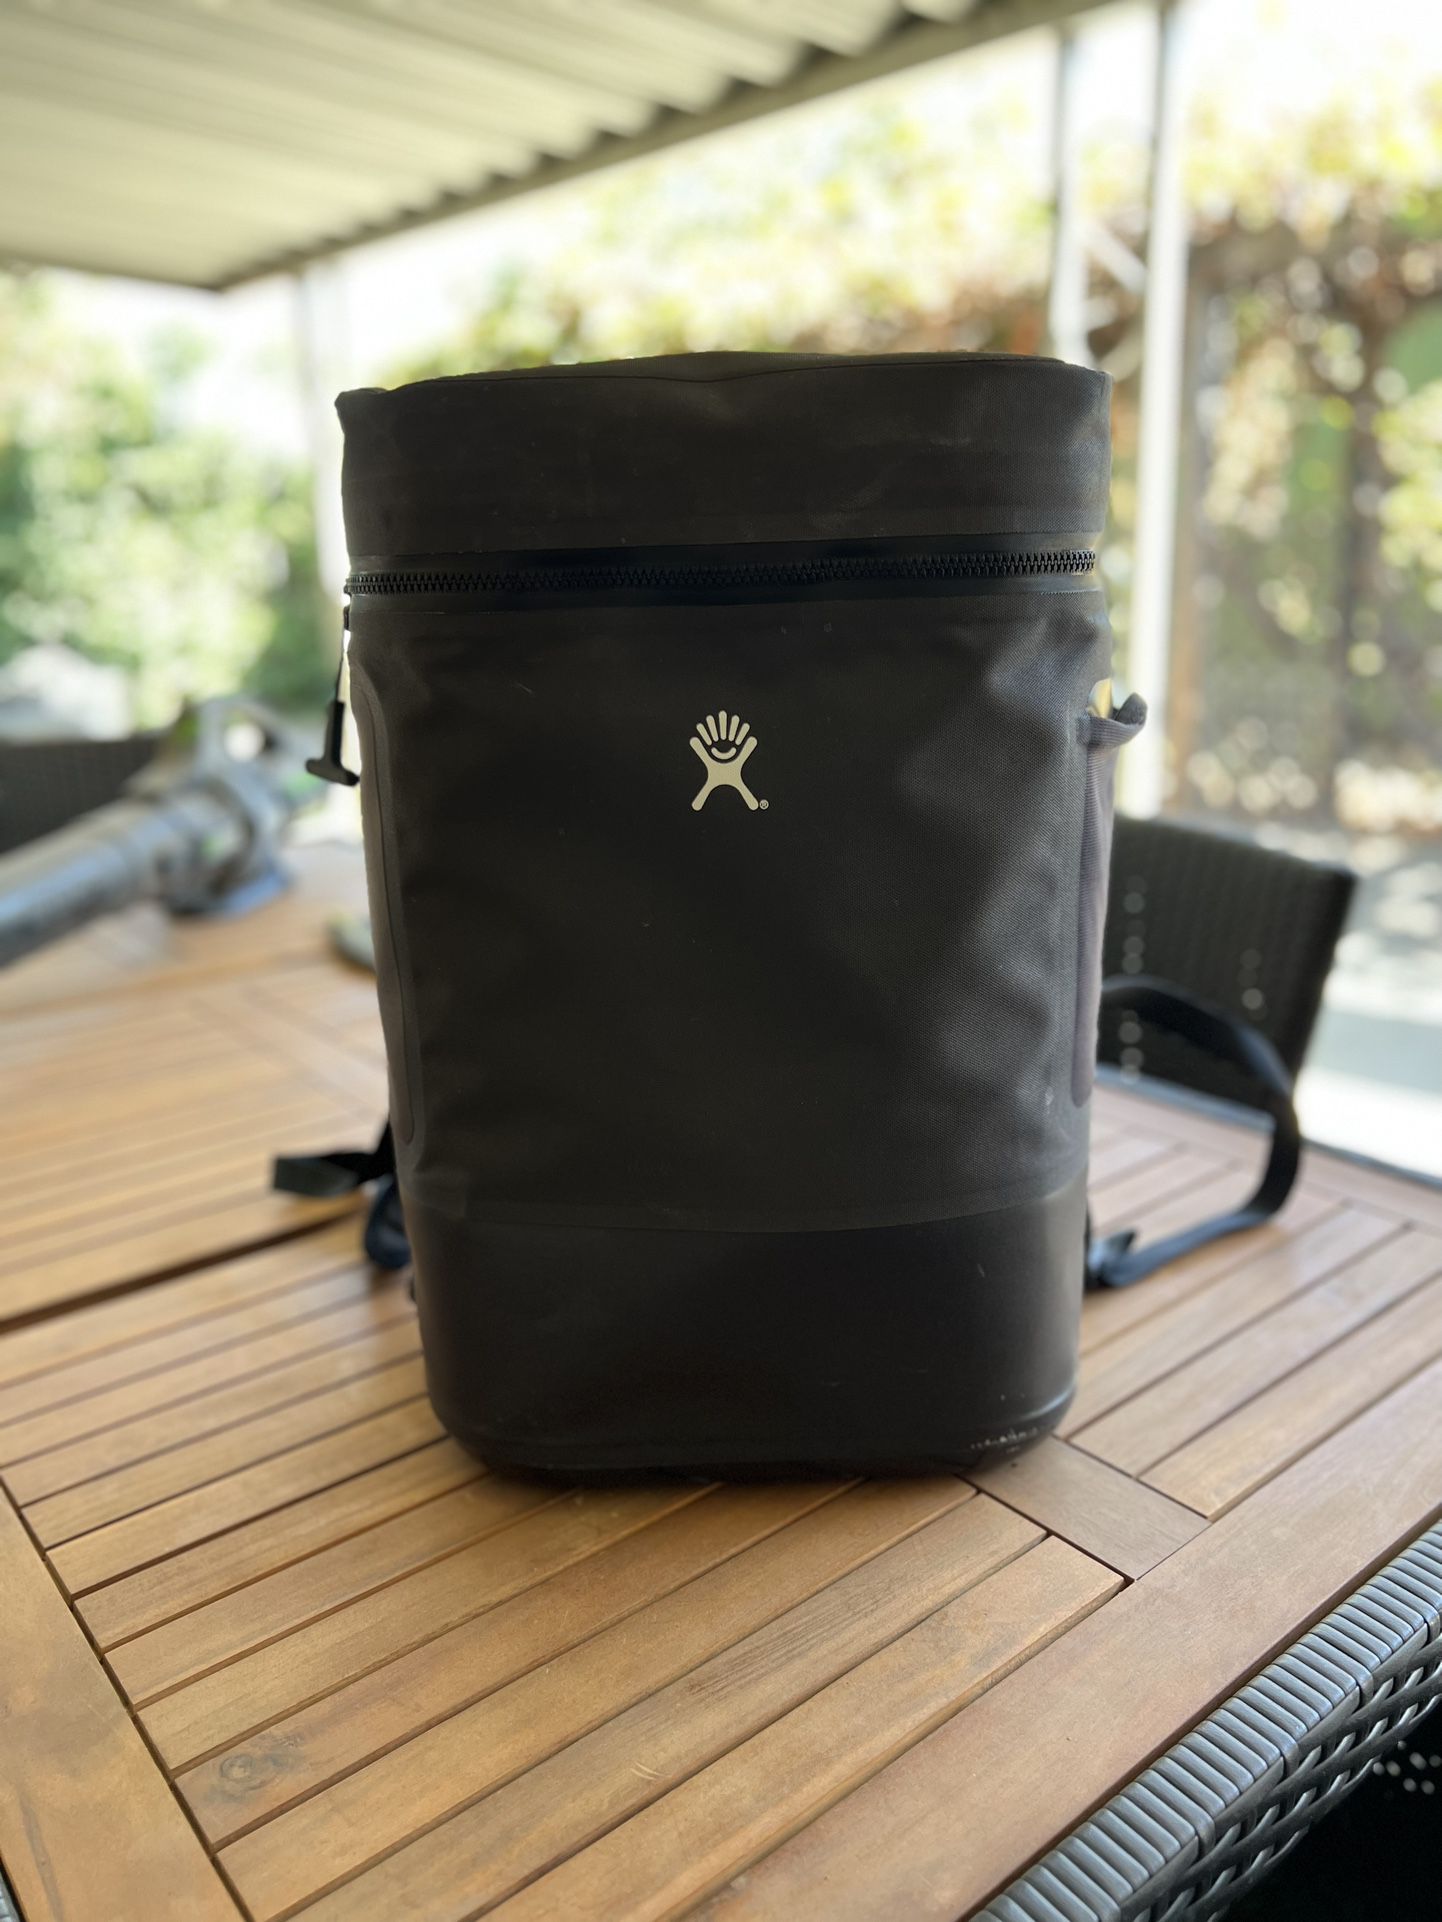 Used Hydro Flask Cooler Backpack 